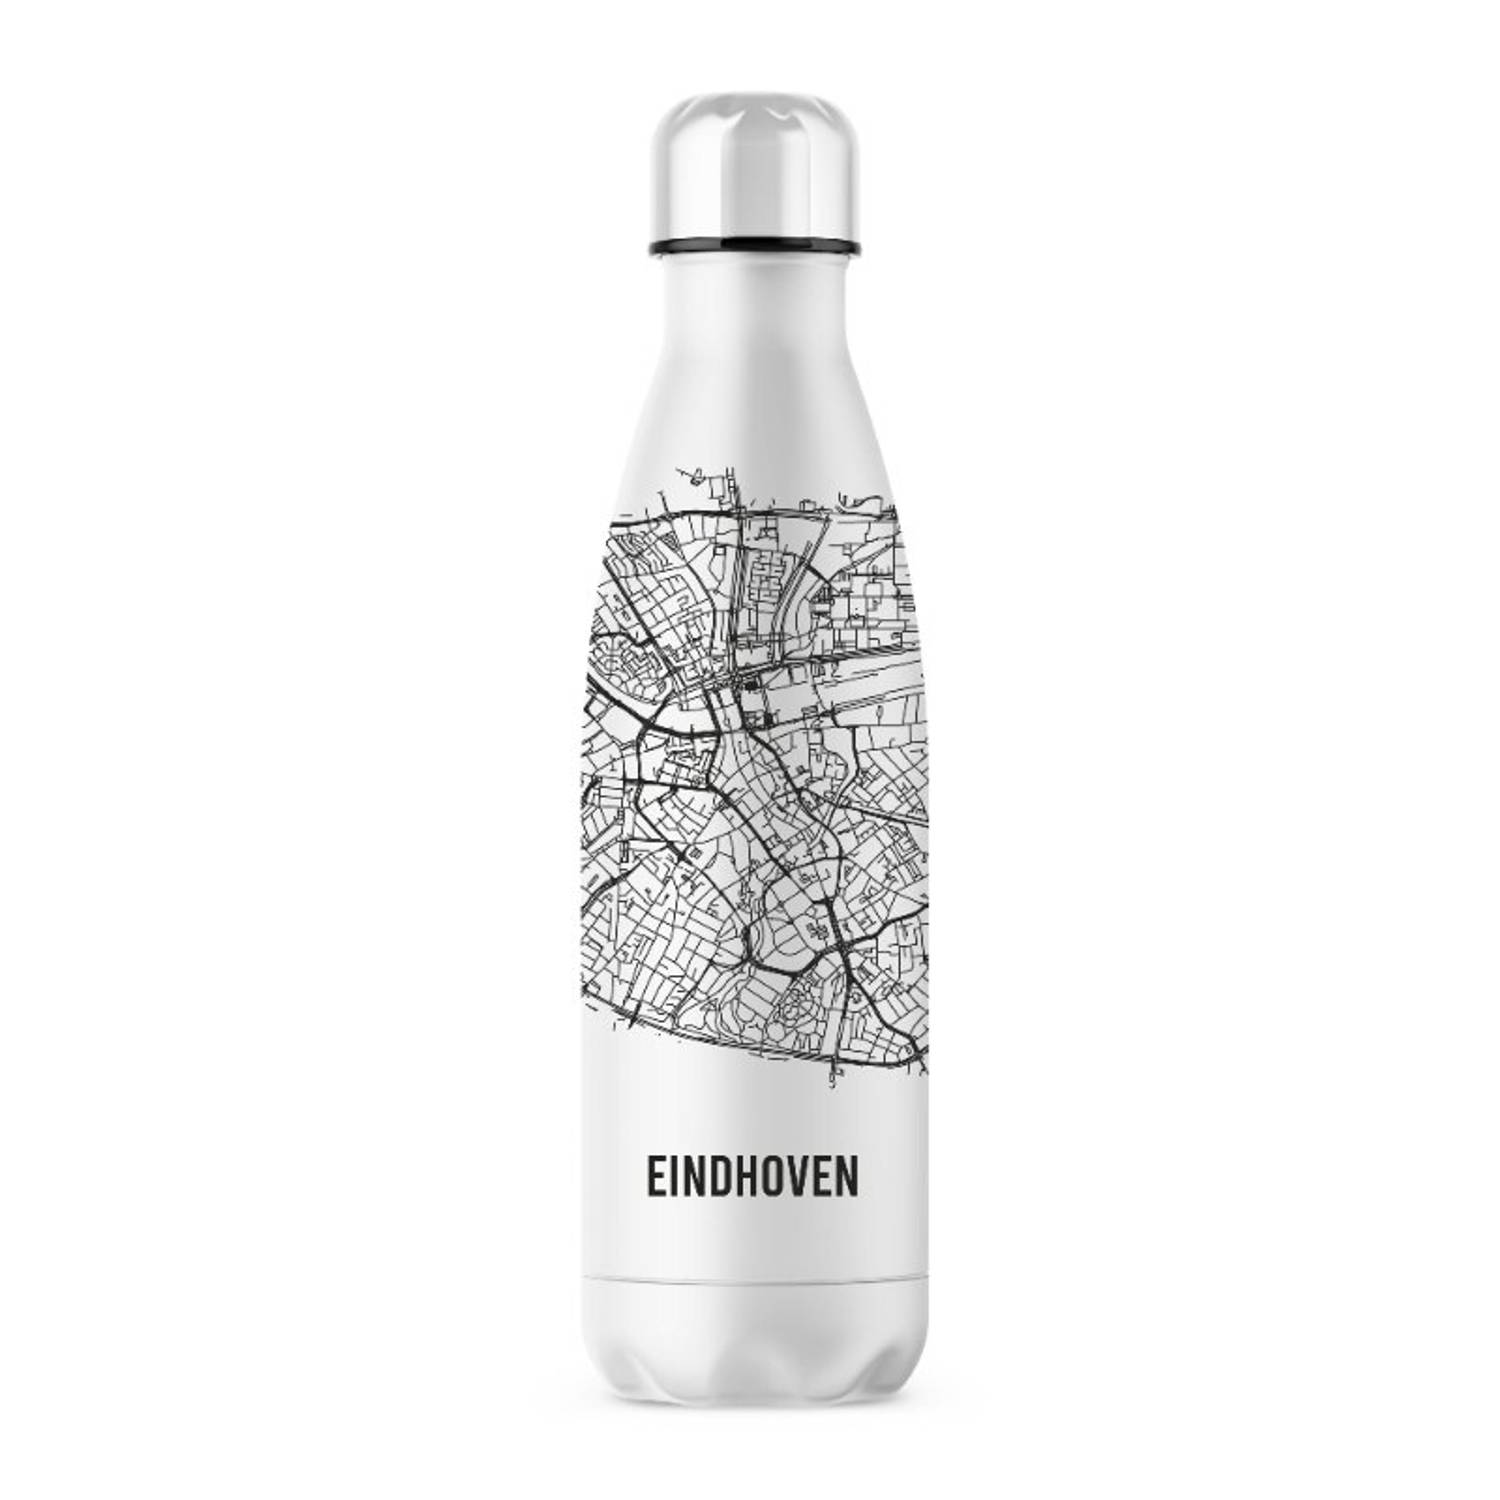 IZY Thermosfles 0.5L, RVS, Eindhoven IZY City Collection